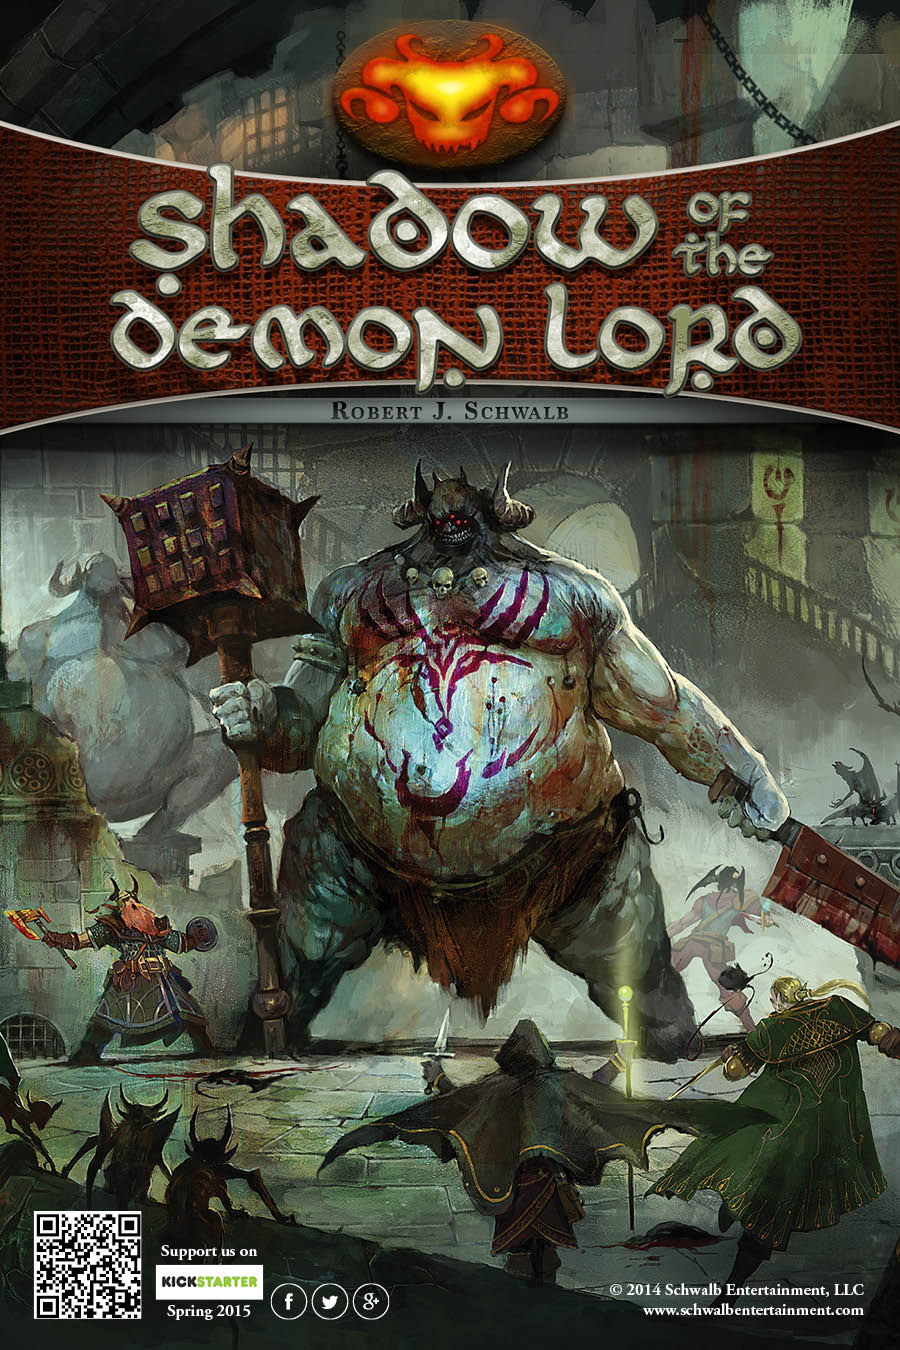 Shadow of the Demon Lord (Image: Schwalb Entertainment)